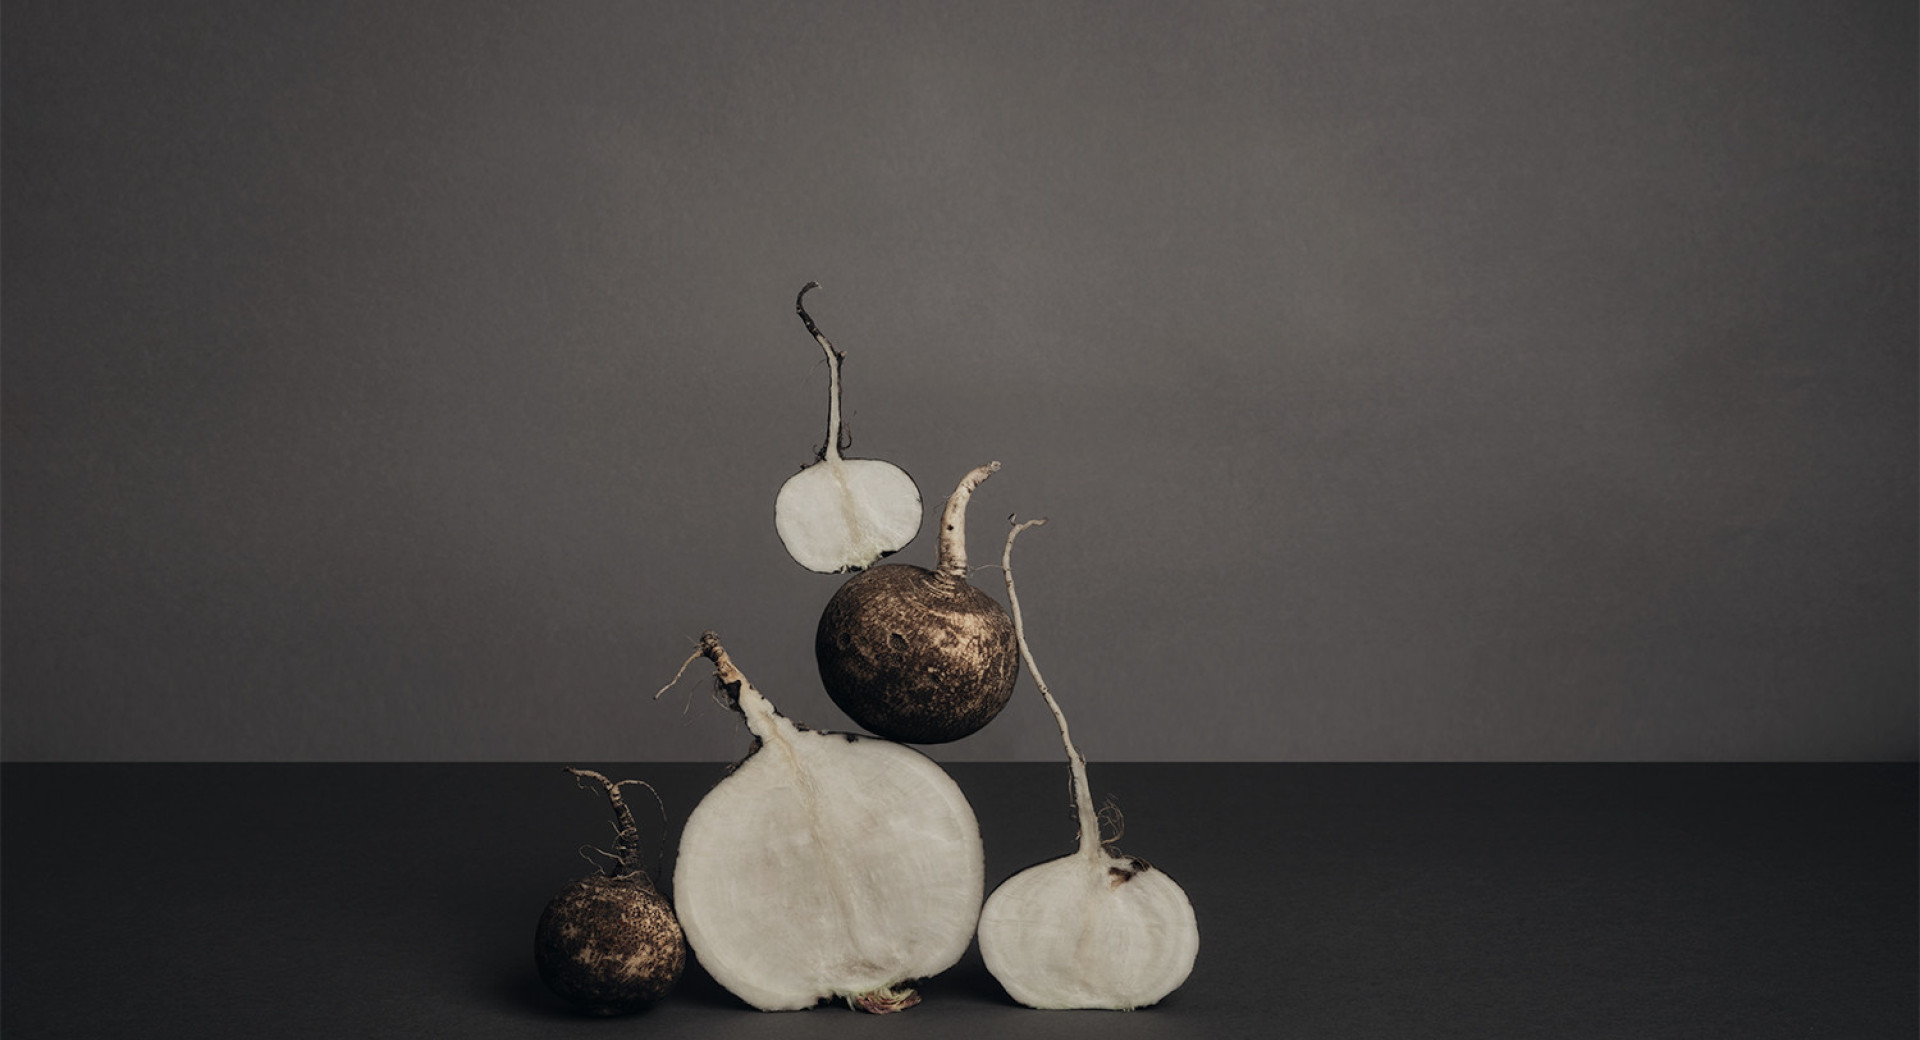 A whole and halved radish arranged in a pyramid shape. Black background, gray backdrop.